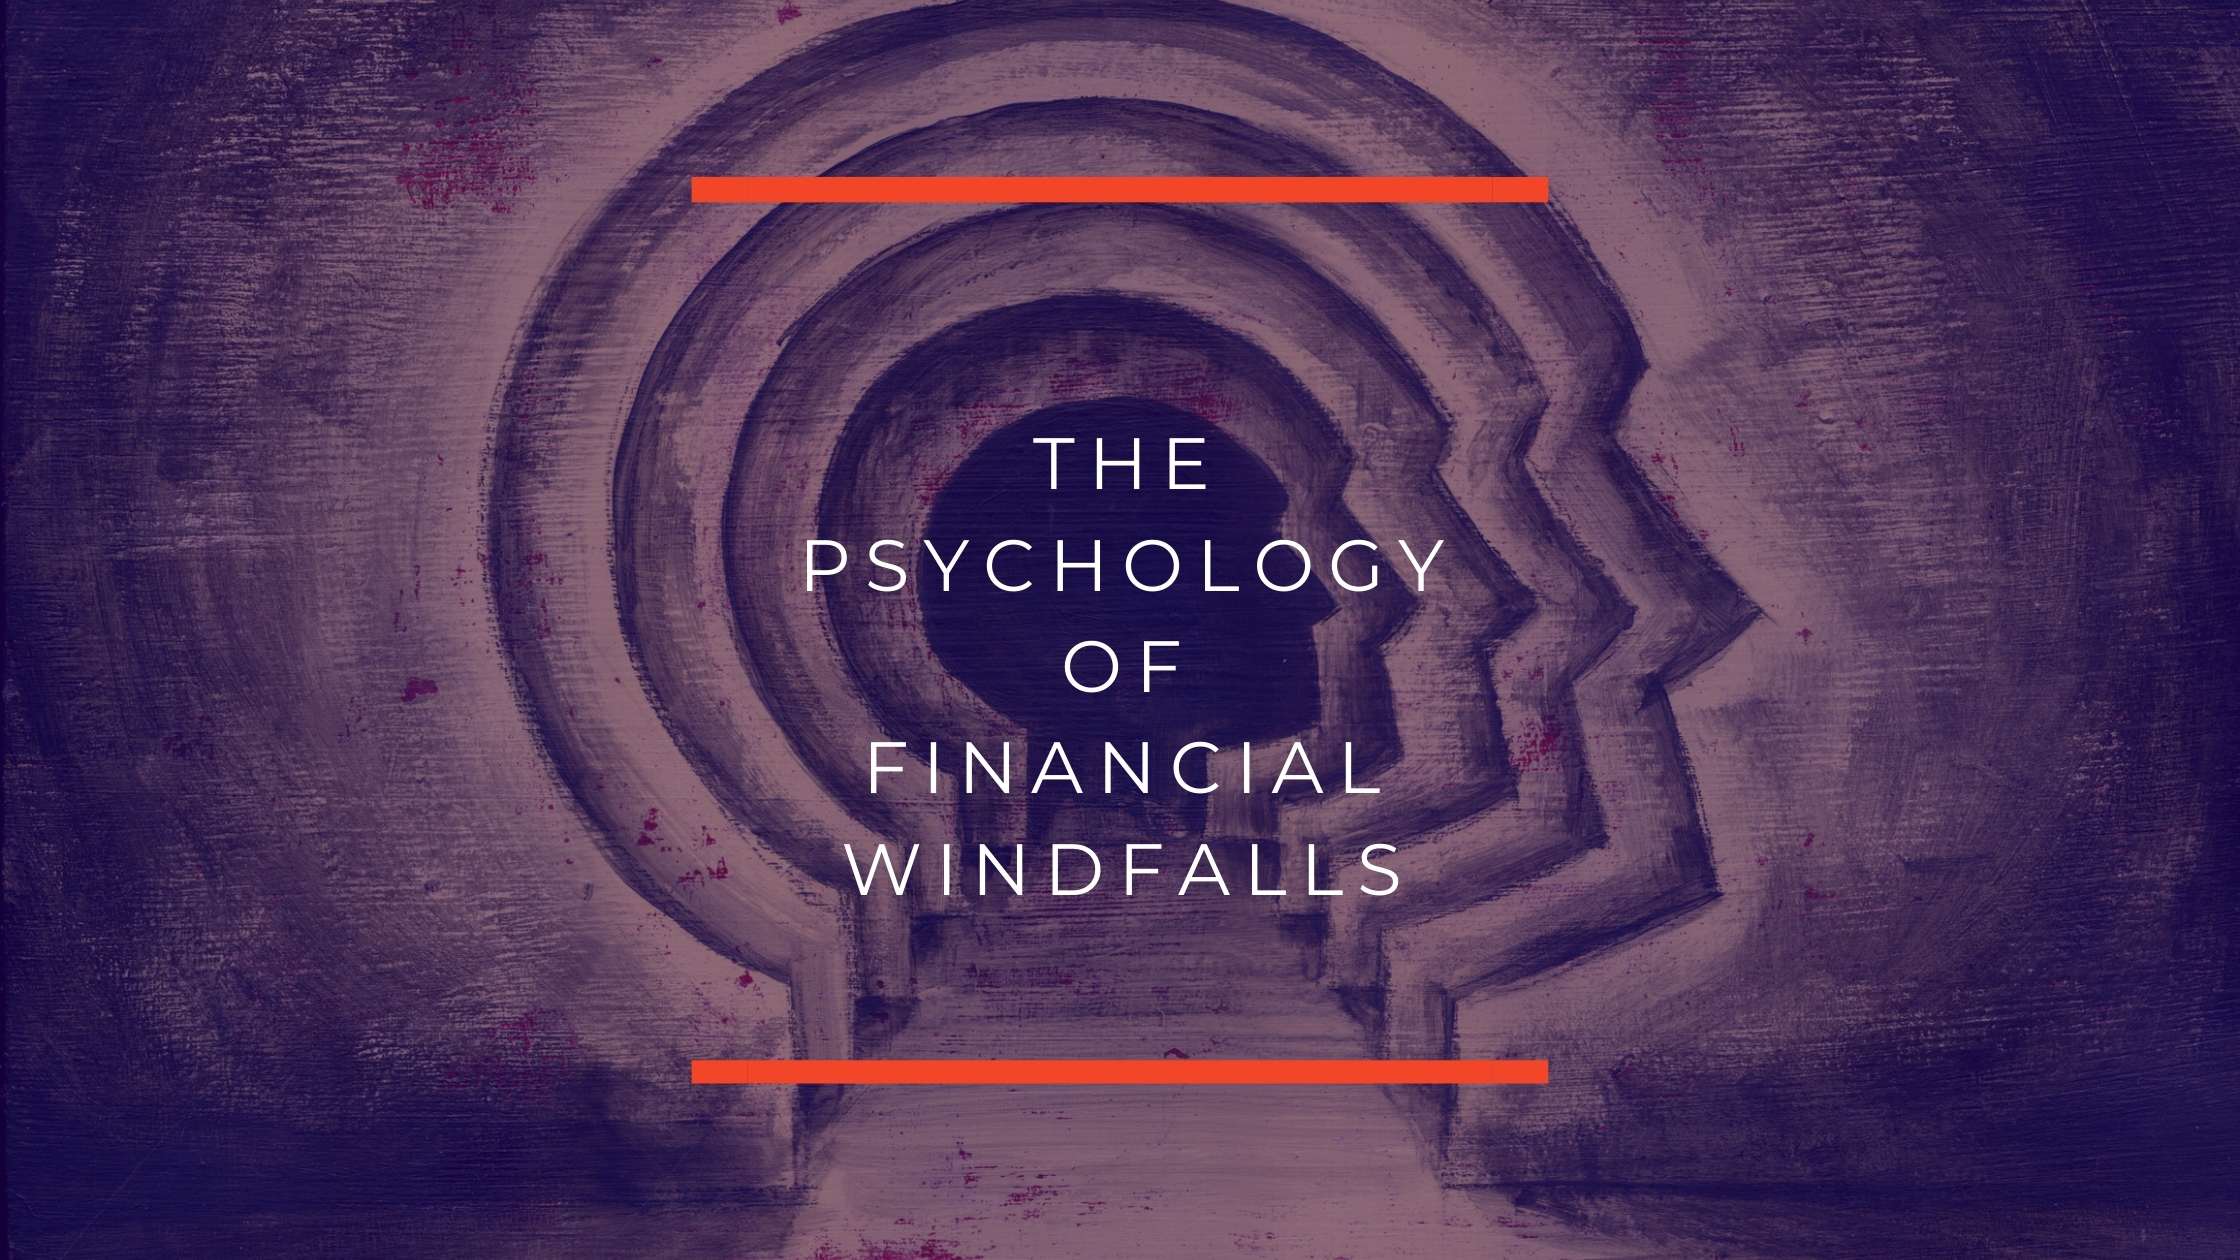 The Psychology of Financial Windfalls